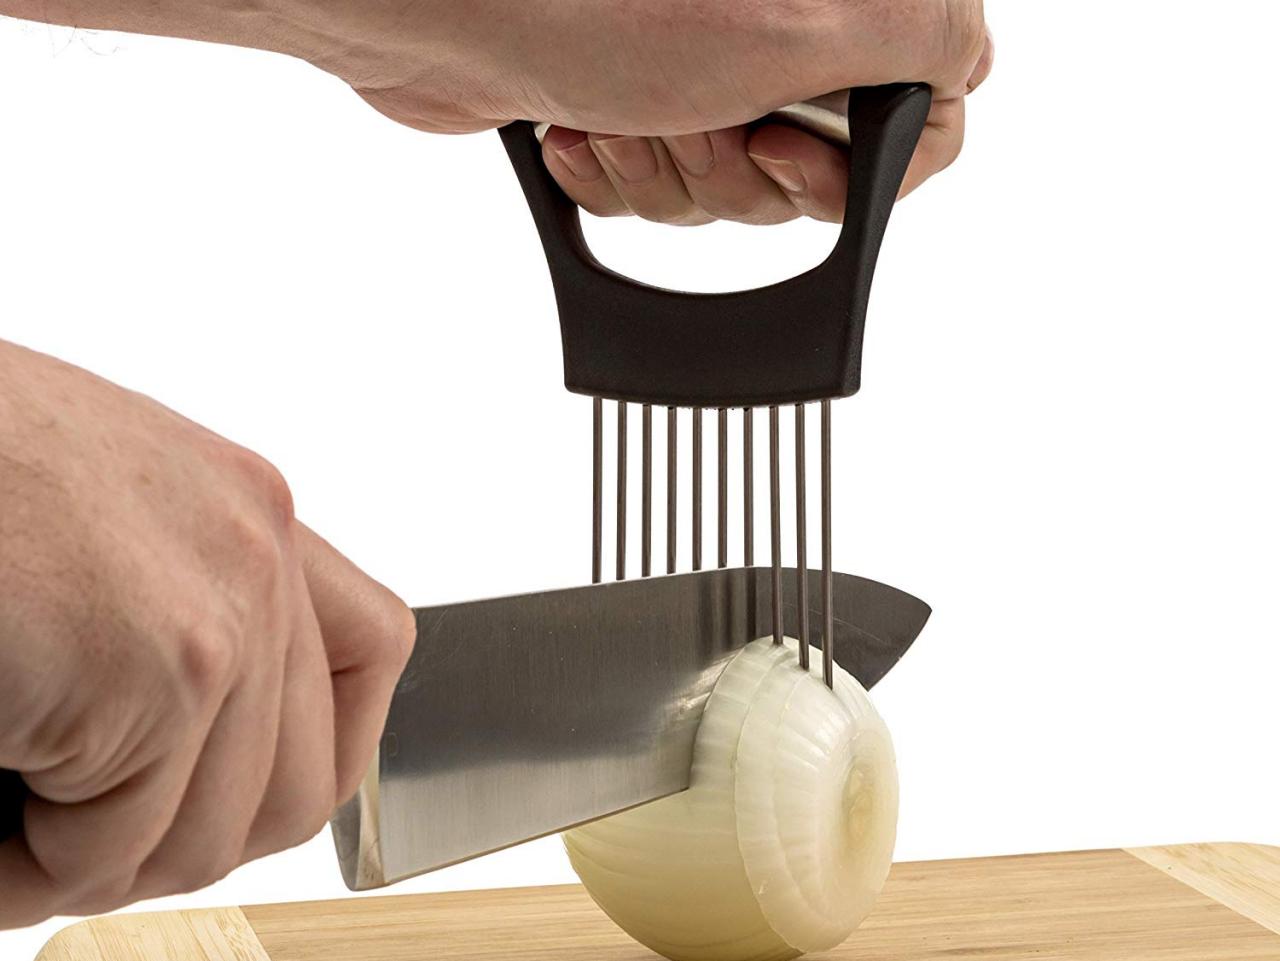 26 Best Clever Kitchen Gadgets and Tools in 2022